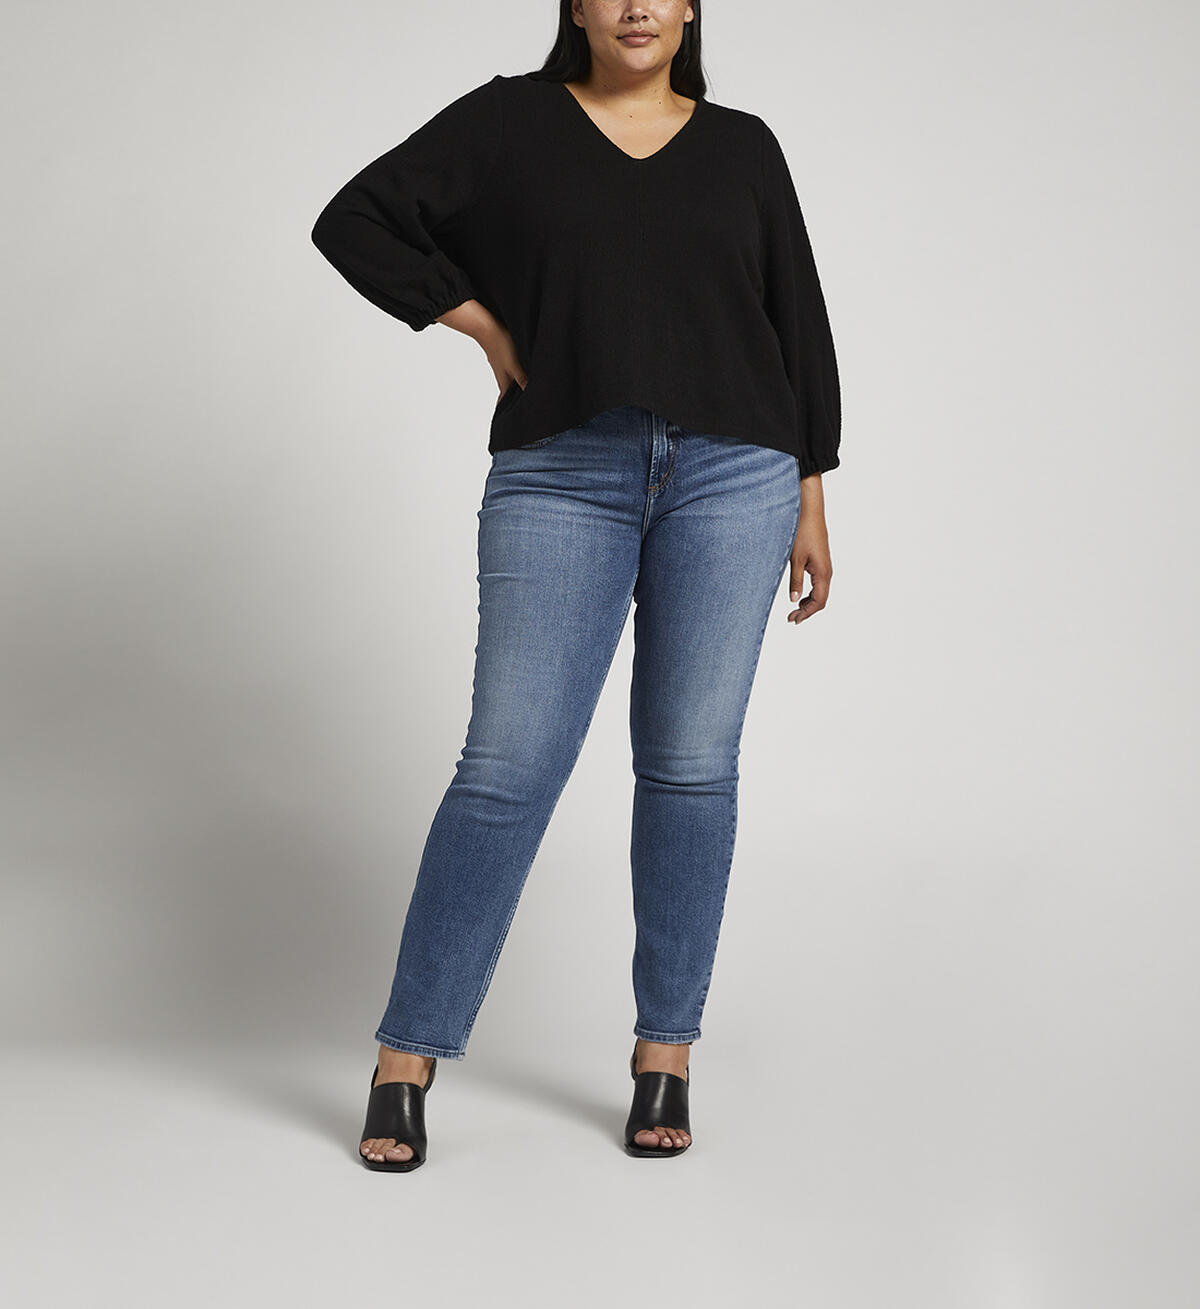 Most Wanted Mid Rise Straight Leg Jeans Plus Size, , hi-res image number 0